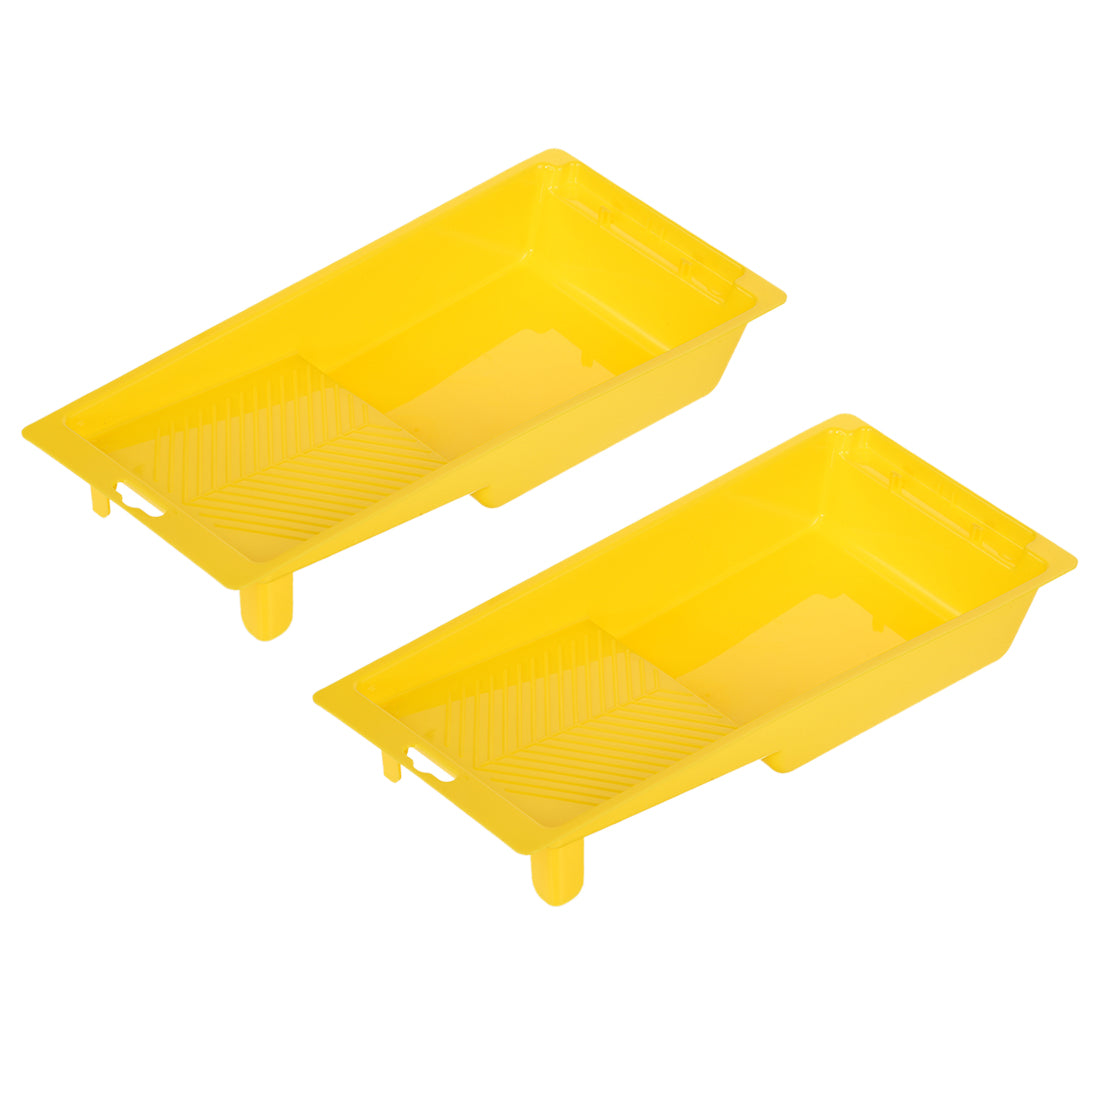 uxcell Uxcell 4 Inch PP Paint Roller Tray, Built for 4-Inch Roller Brushes 2Pcs